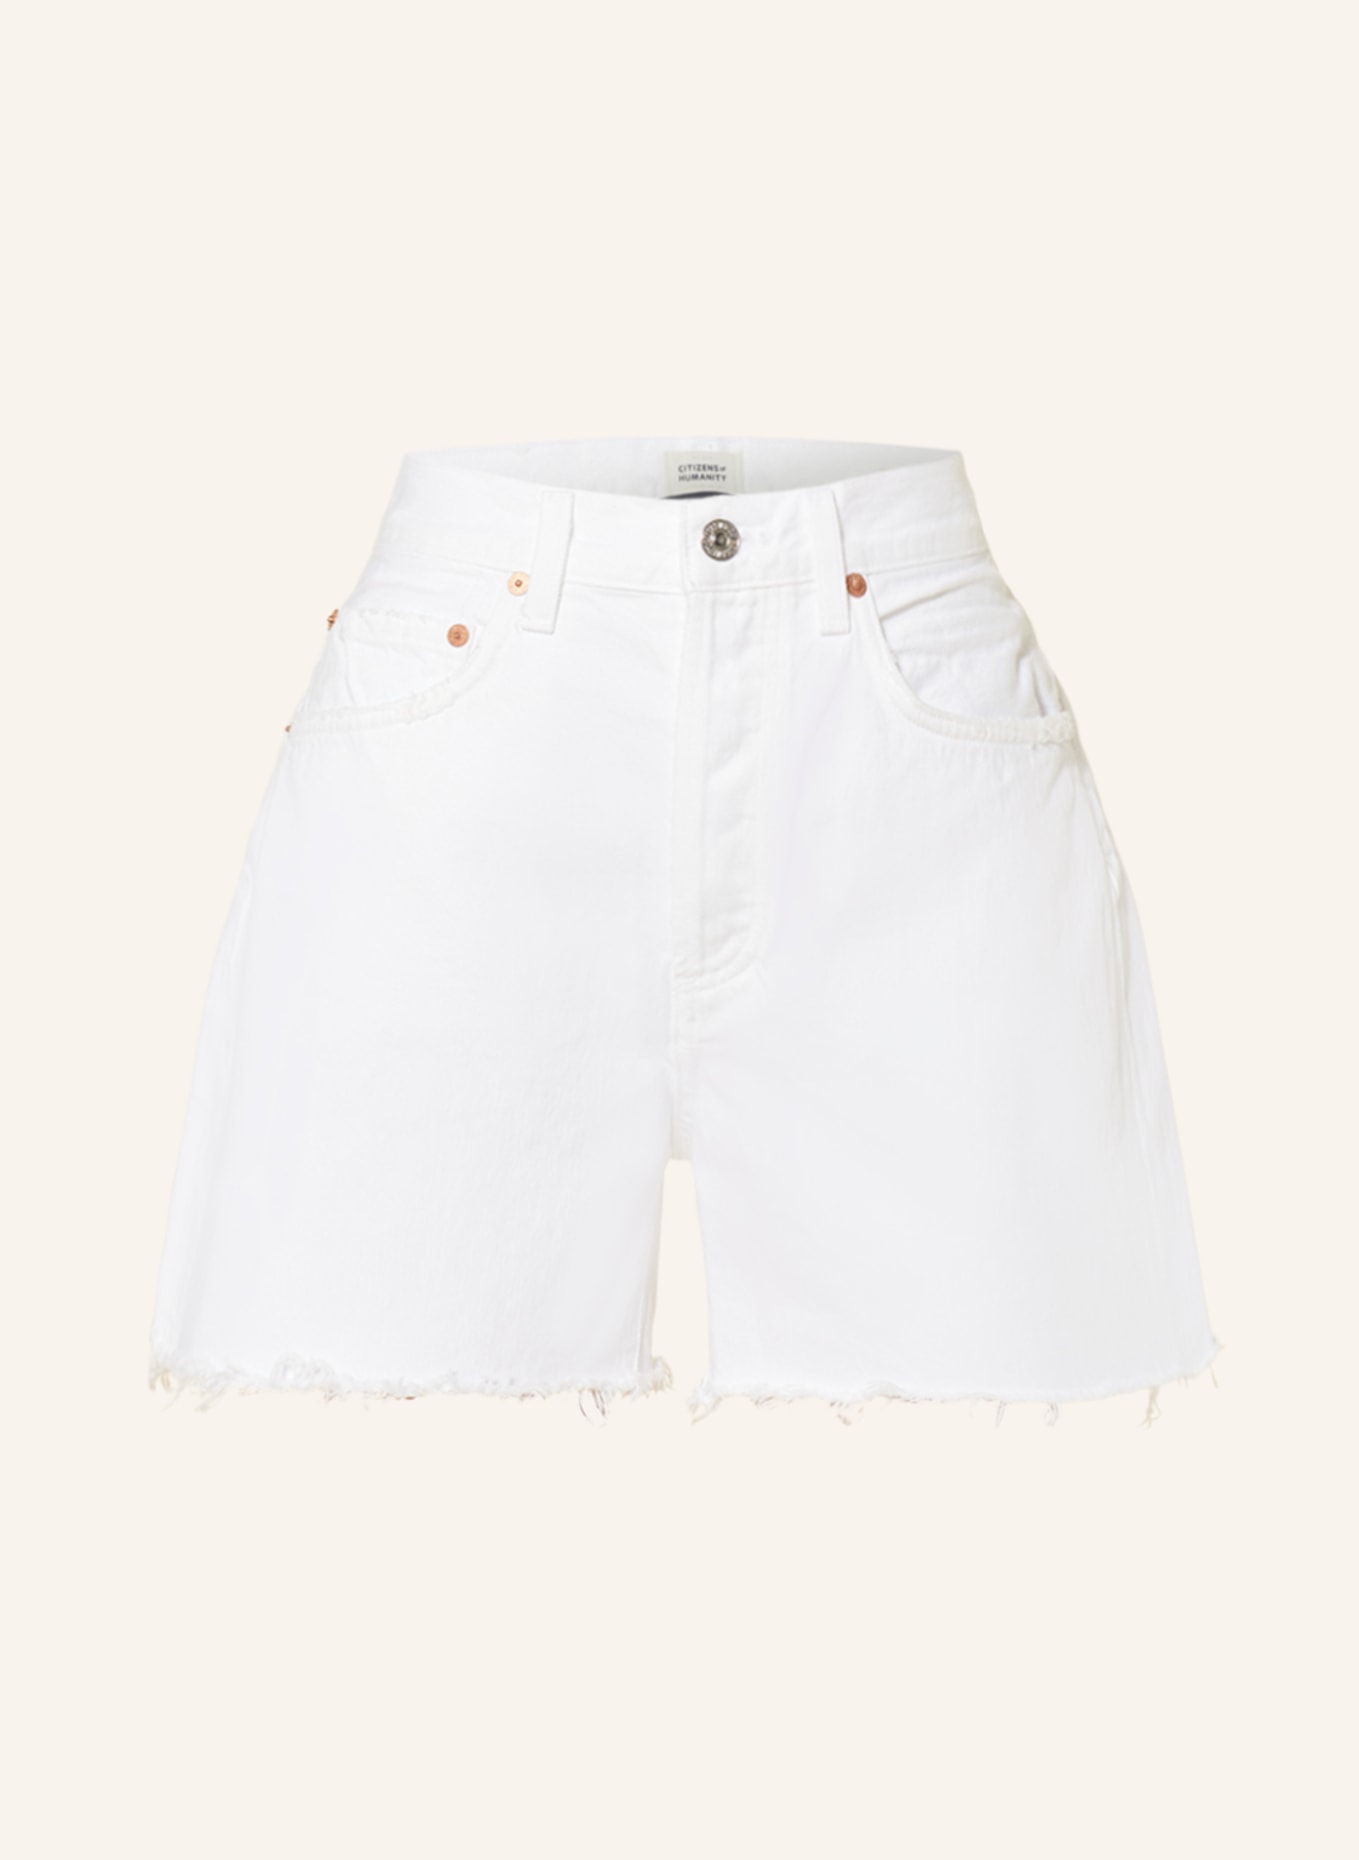 CITIZENS of HUMANITY Jeansshorts ANNABELLE, Farbe: Gloss white (Bild 1)